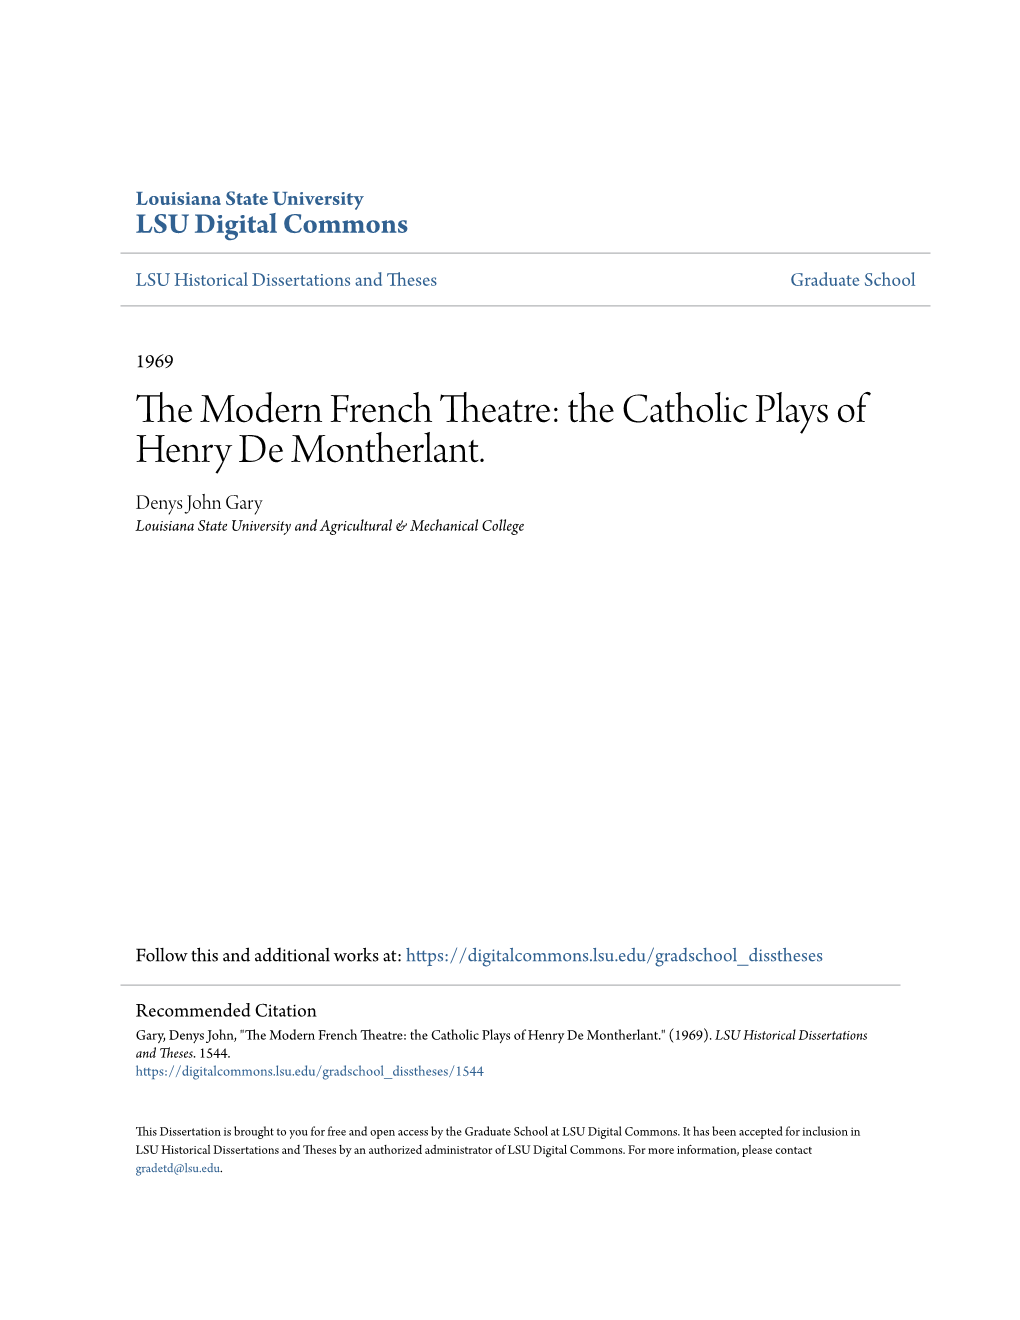 The Catholic Plays of Henry De Montherlant. Denys John Gary Louisiana State University and Agricultural & Mechanical College